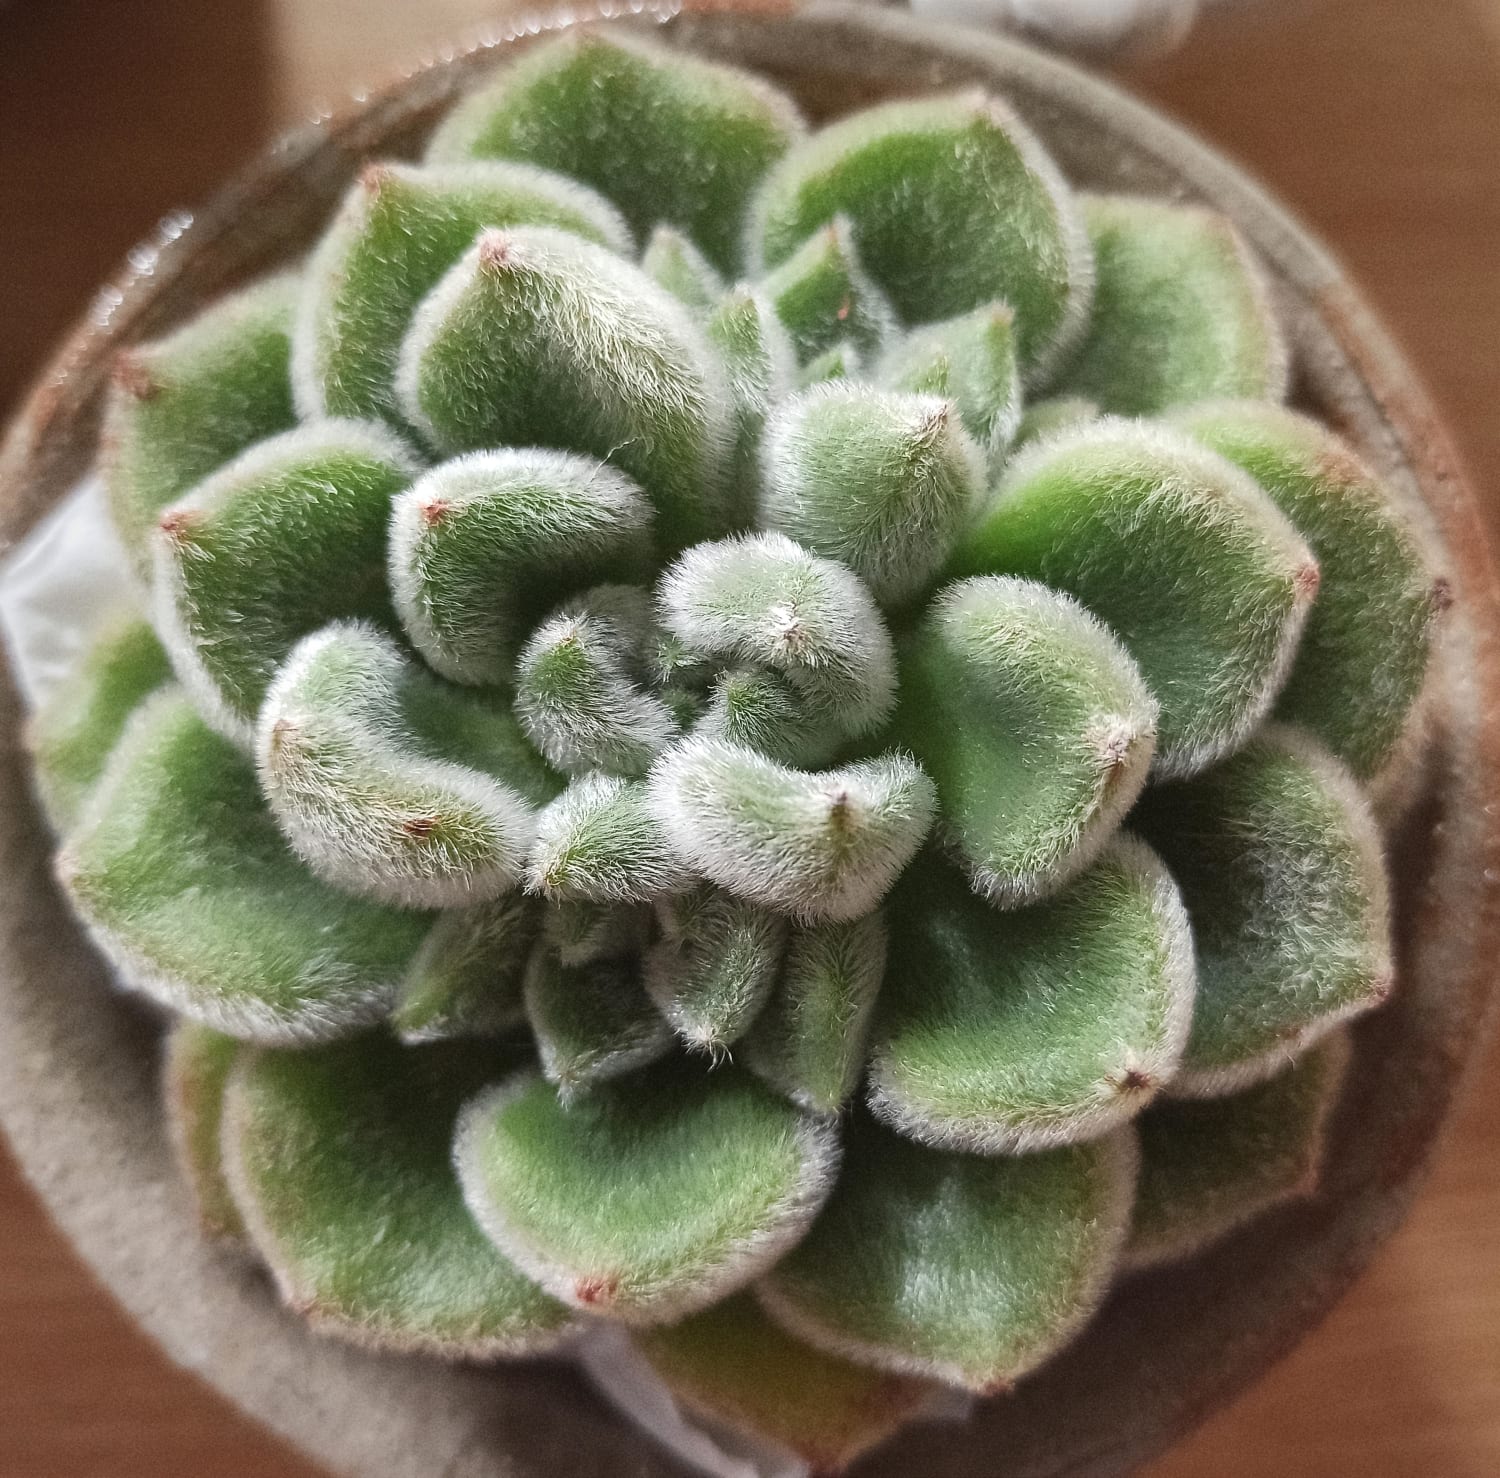 Plant mail arrived this morning! ☑️Chubby, ☑️Furry, ☑️Absolutely gorgeous